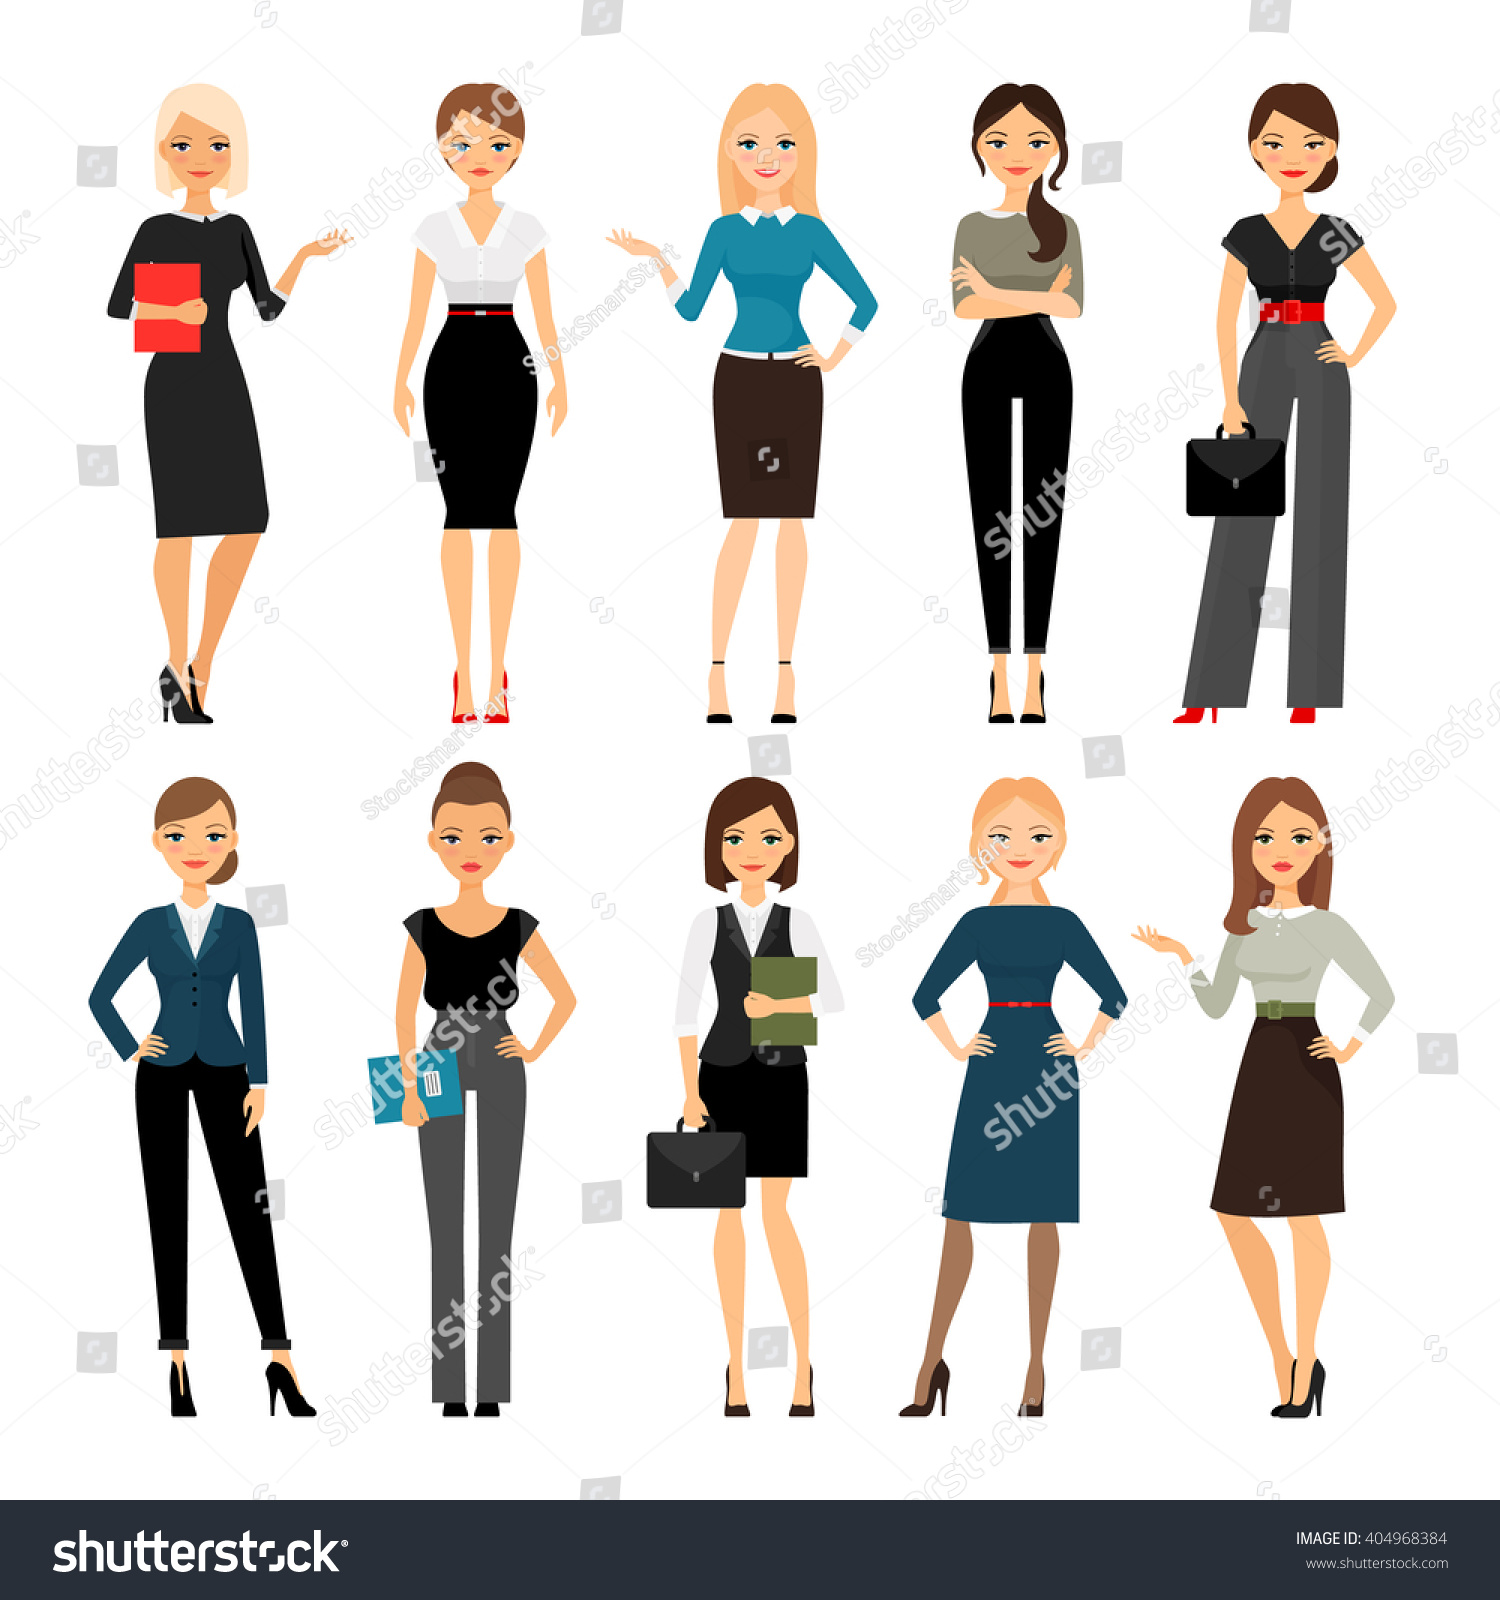 business casual clipart - photo #39